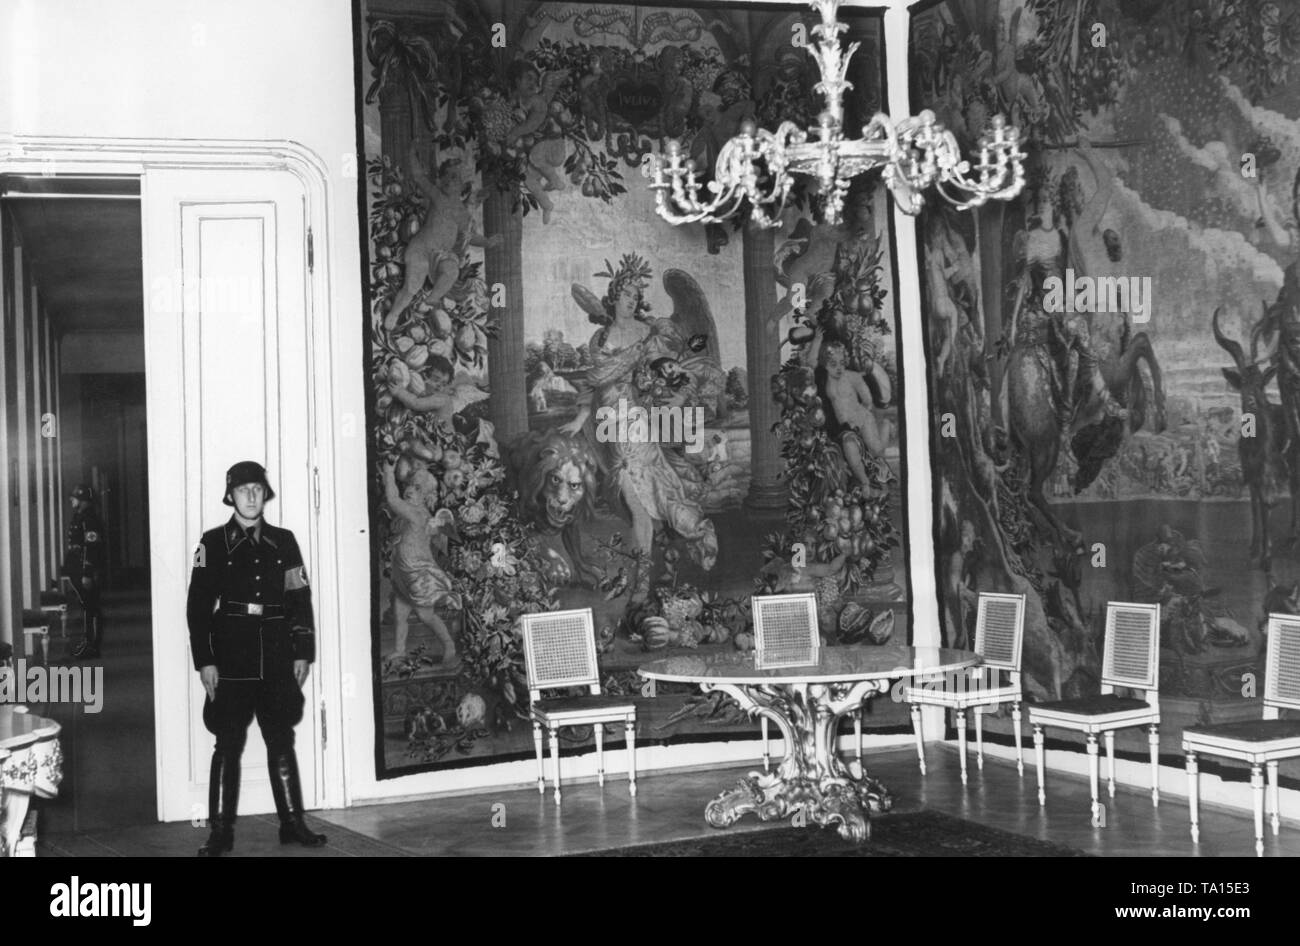 Reception room of the Reich Protector of Bohemia and Moravia in the Prague Castle. Since March 1939, the areas of Bohemia and Moravia had been under German occupation. Stock Photo